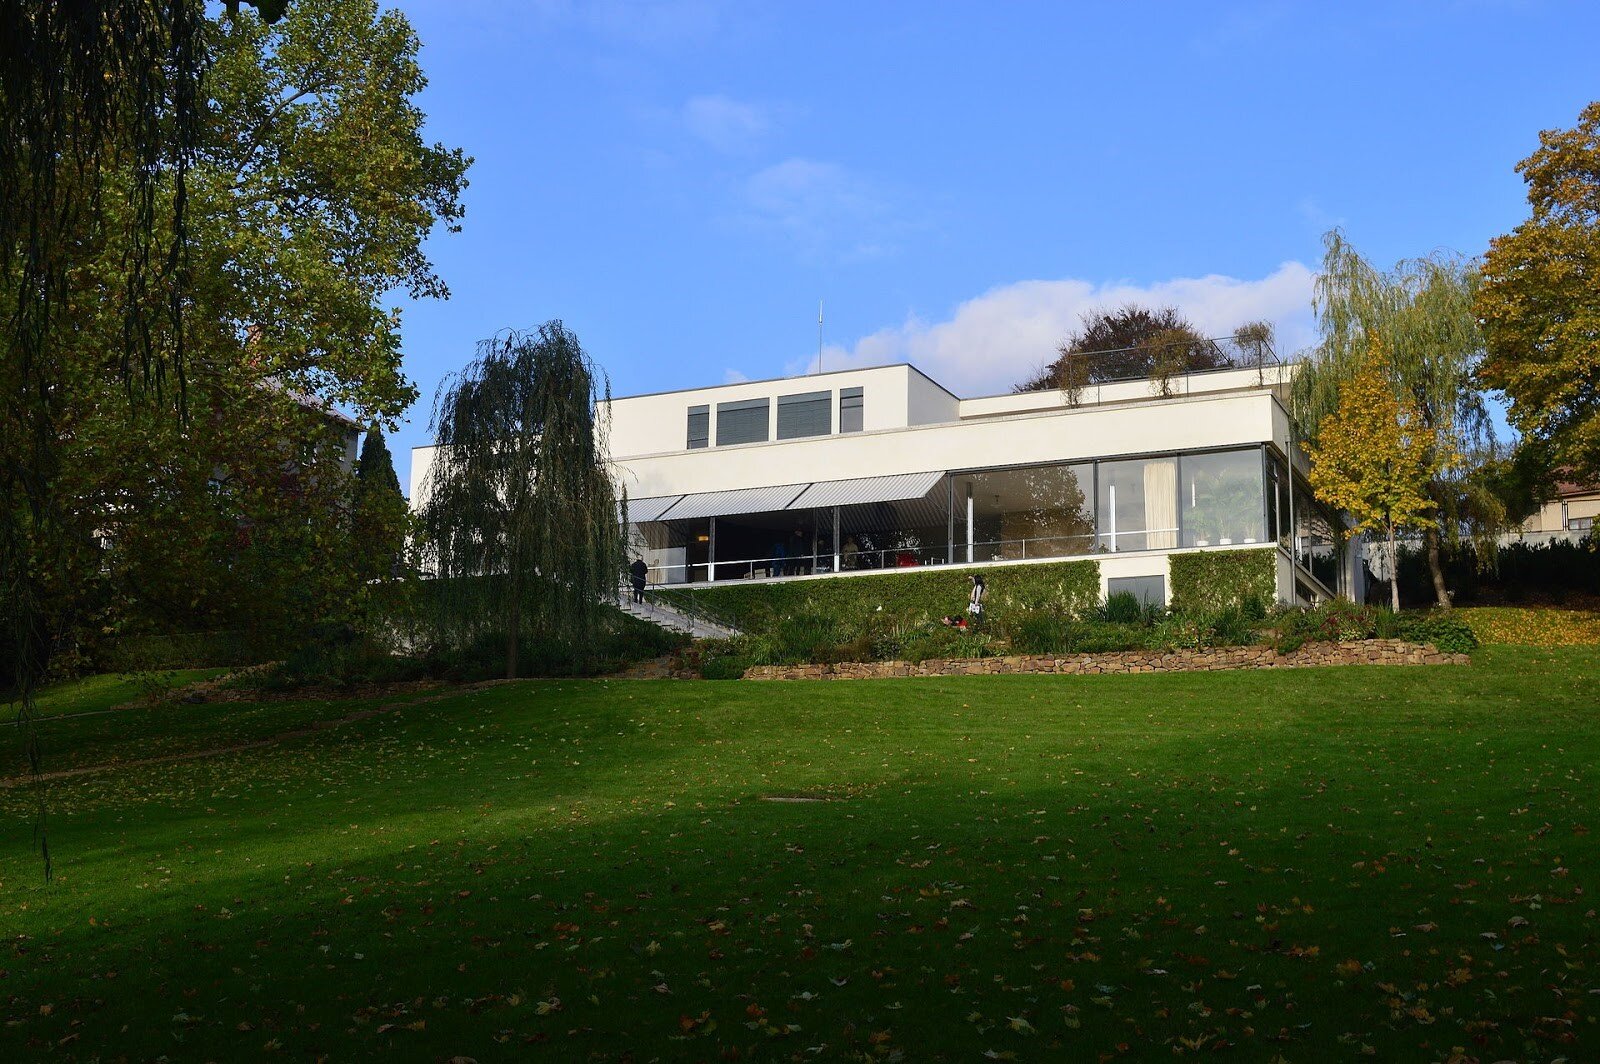 Van der Rohe’s Villa Tugendhat in the Czech Republic | Photo courtesy of Petr1987 and Wikimedia Commons